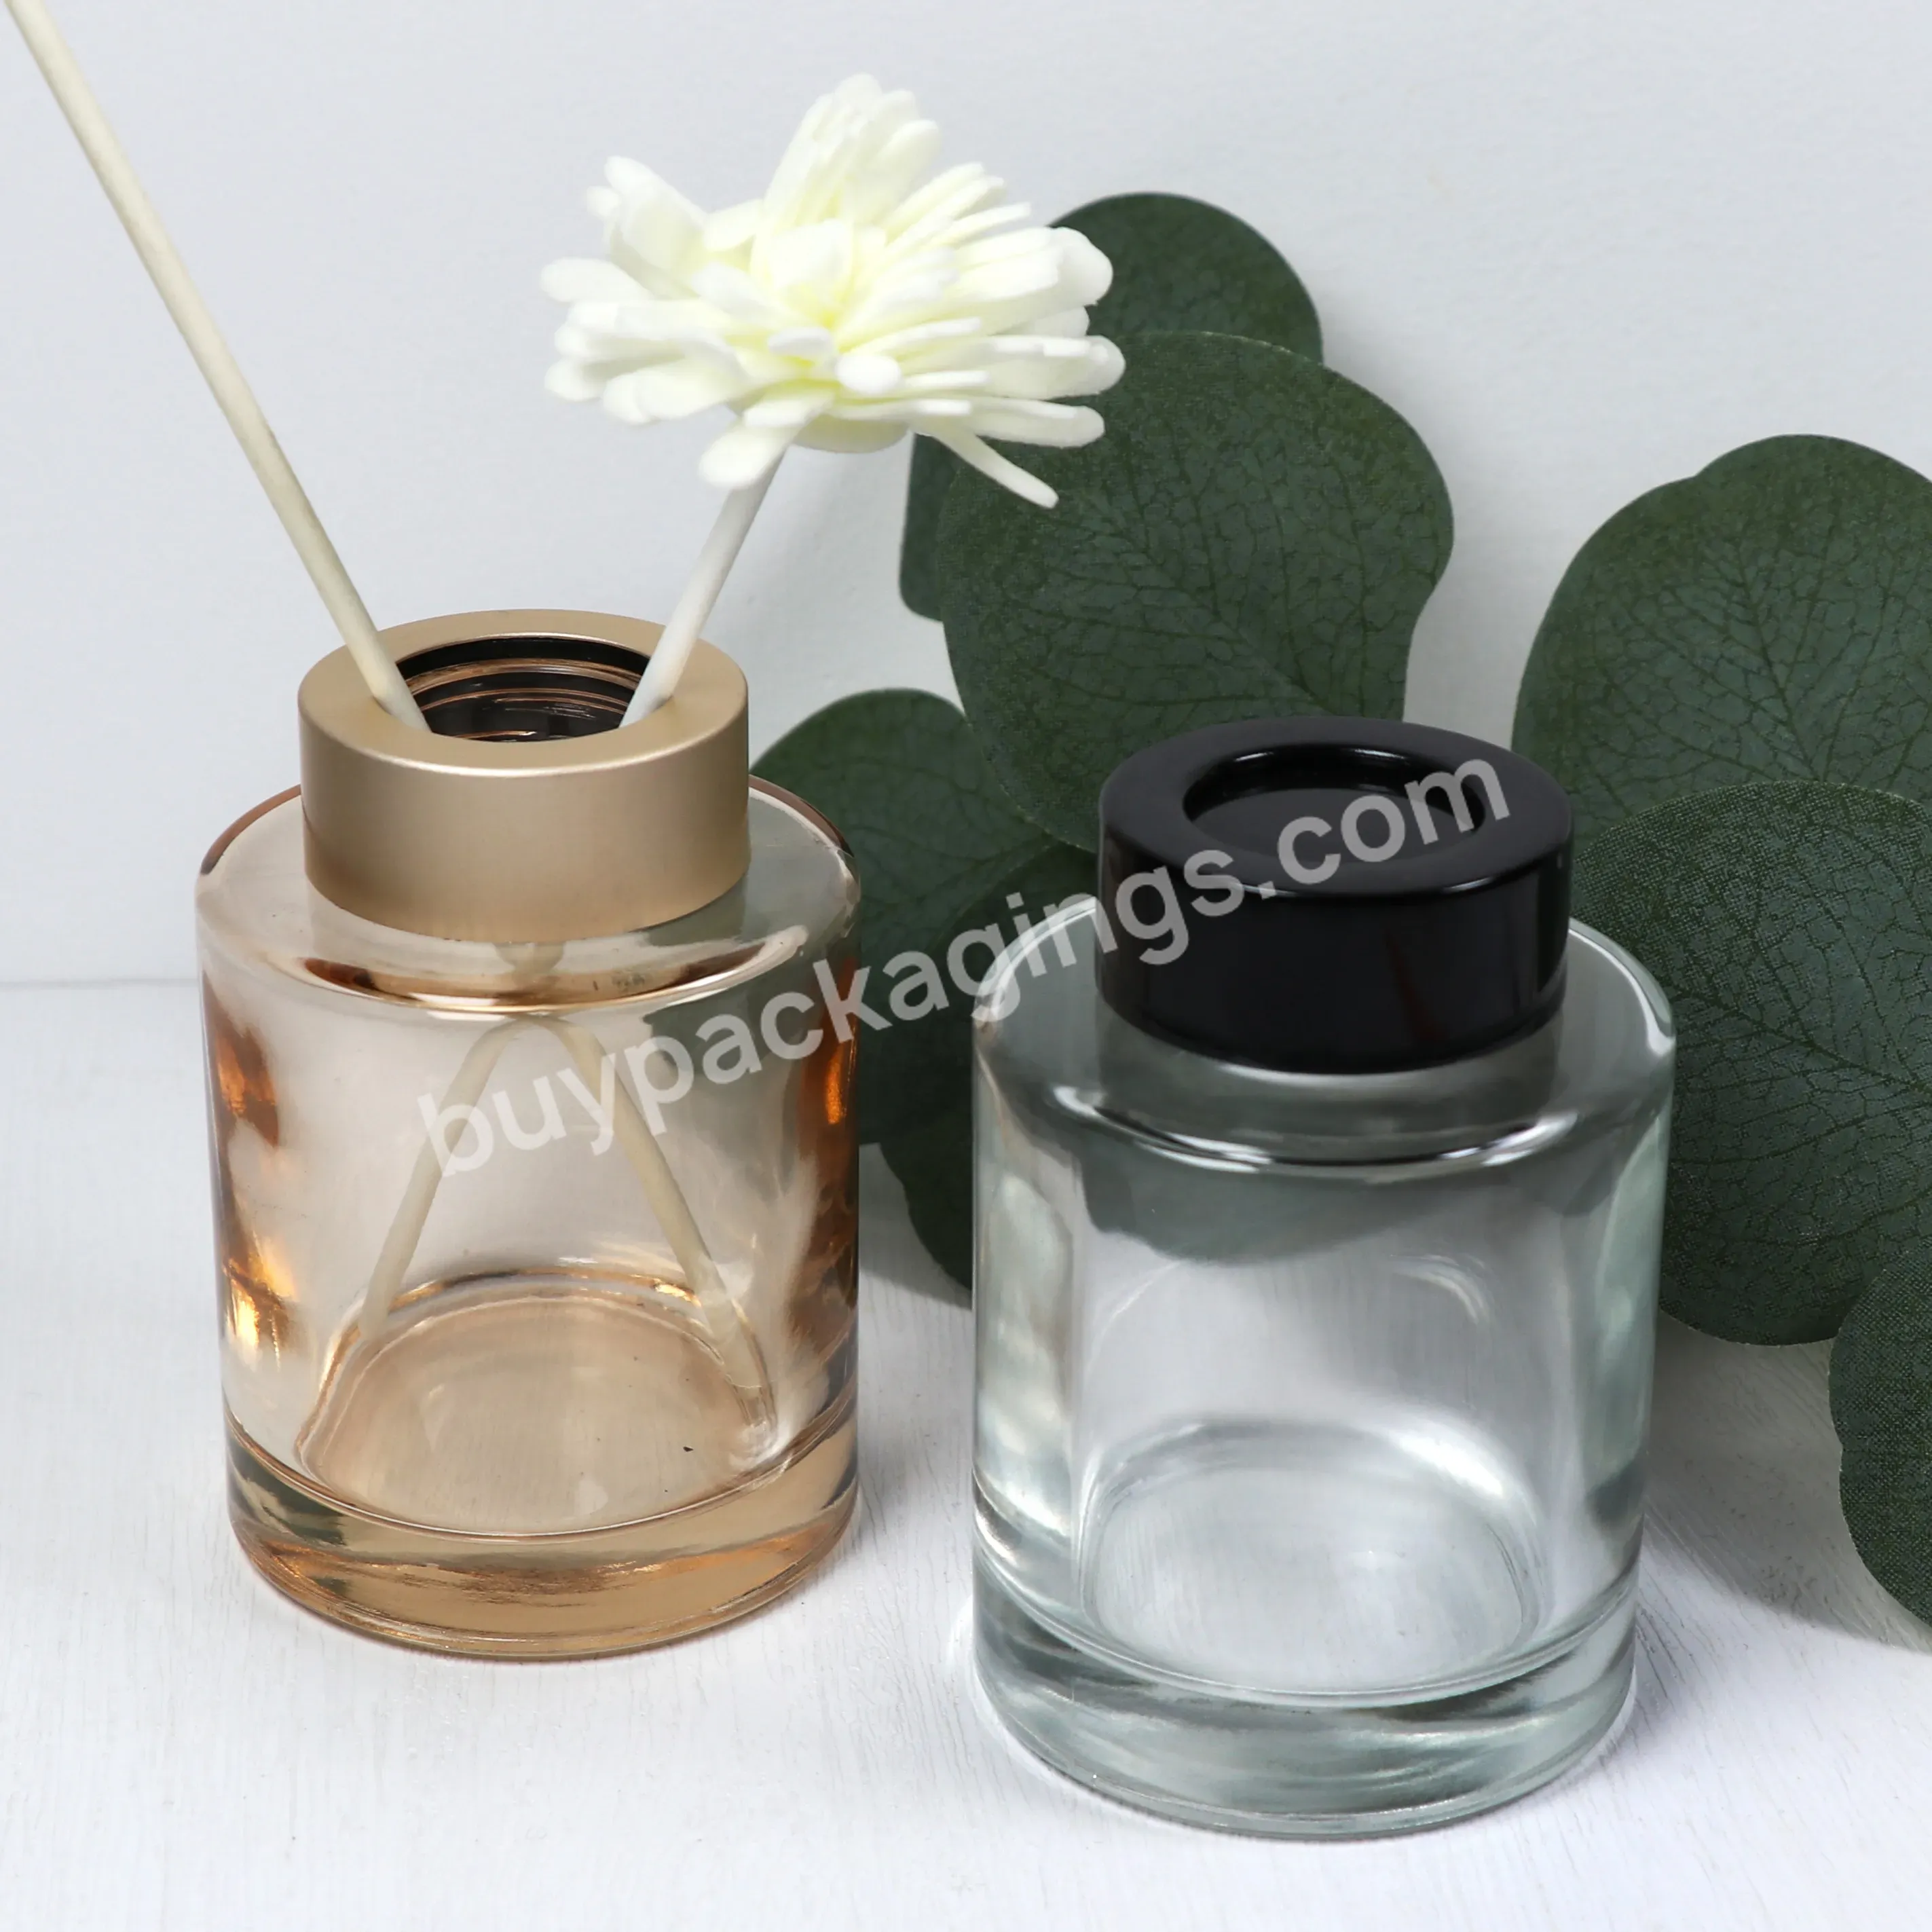 Custom Packaging 100ml 200ml Perfume Fireless Aromatherapy Reed Diffuser Bottles With Lid Stick Gift Box - Buy Aromatherapy Reed Diffuser Bottles,Diffuser Bottle With Box,Reed Diffuser Glass Bottle.